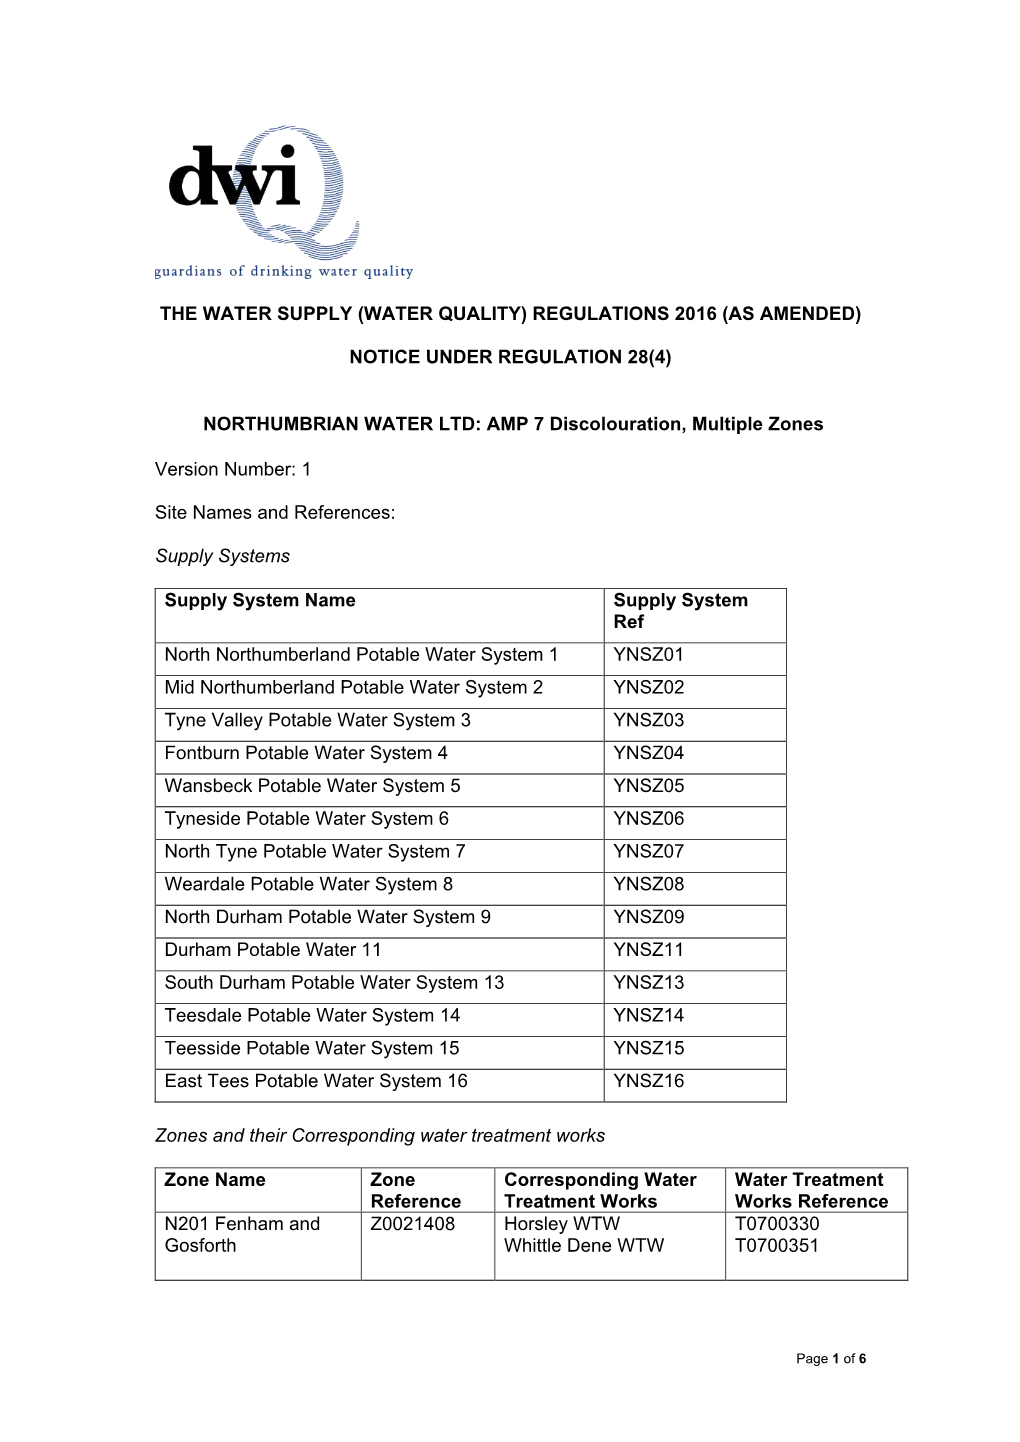 Water Quality) Regulations 2016 (As Amended)